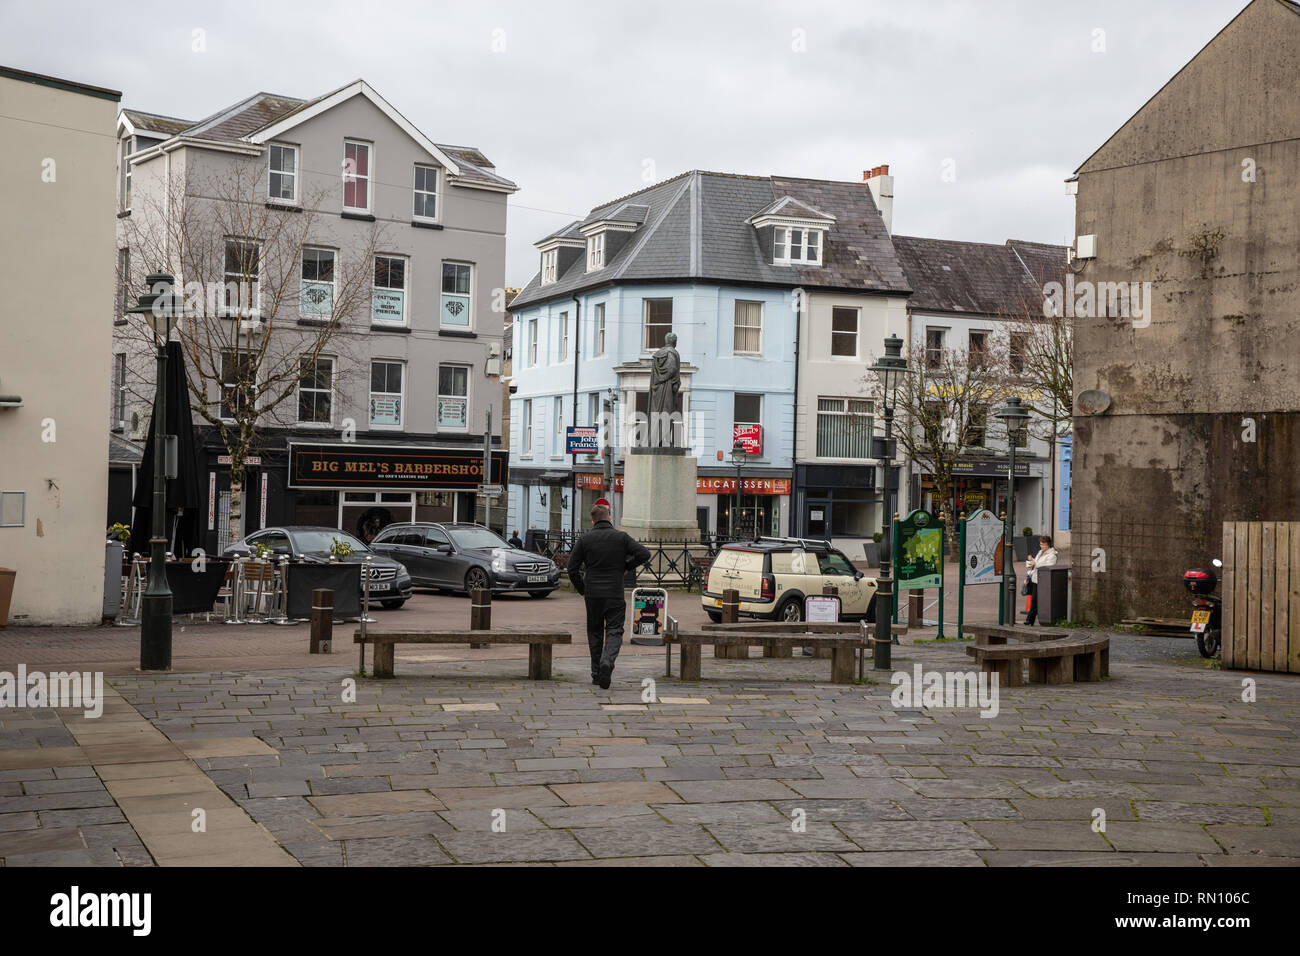 Typical view of Carmarthen Notts Square on a weekday.  Grey overcast weather and not many shoppers. Empty shops to let and parked cars. Stock Photo